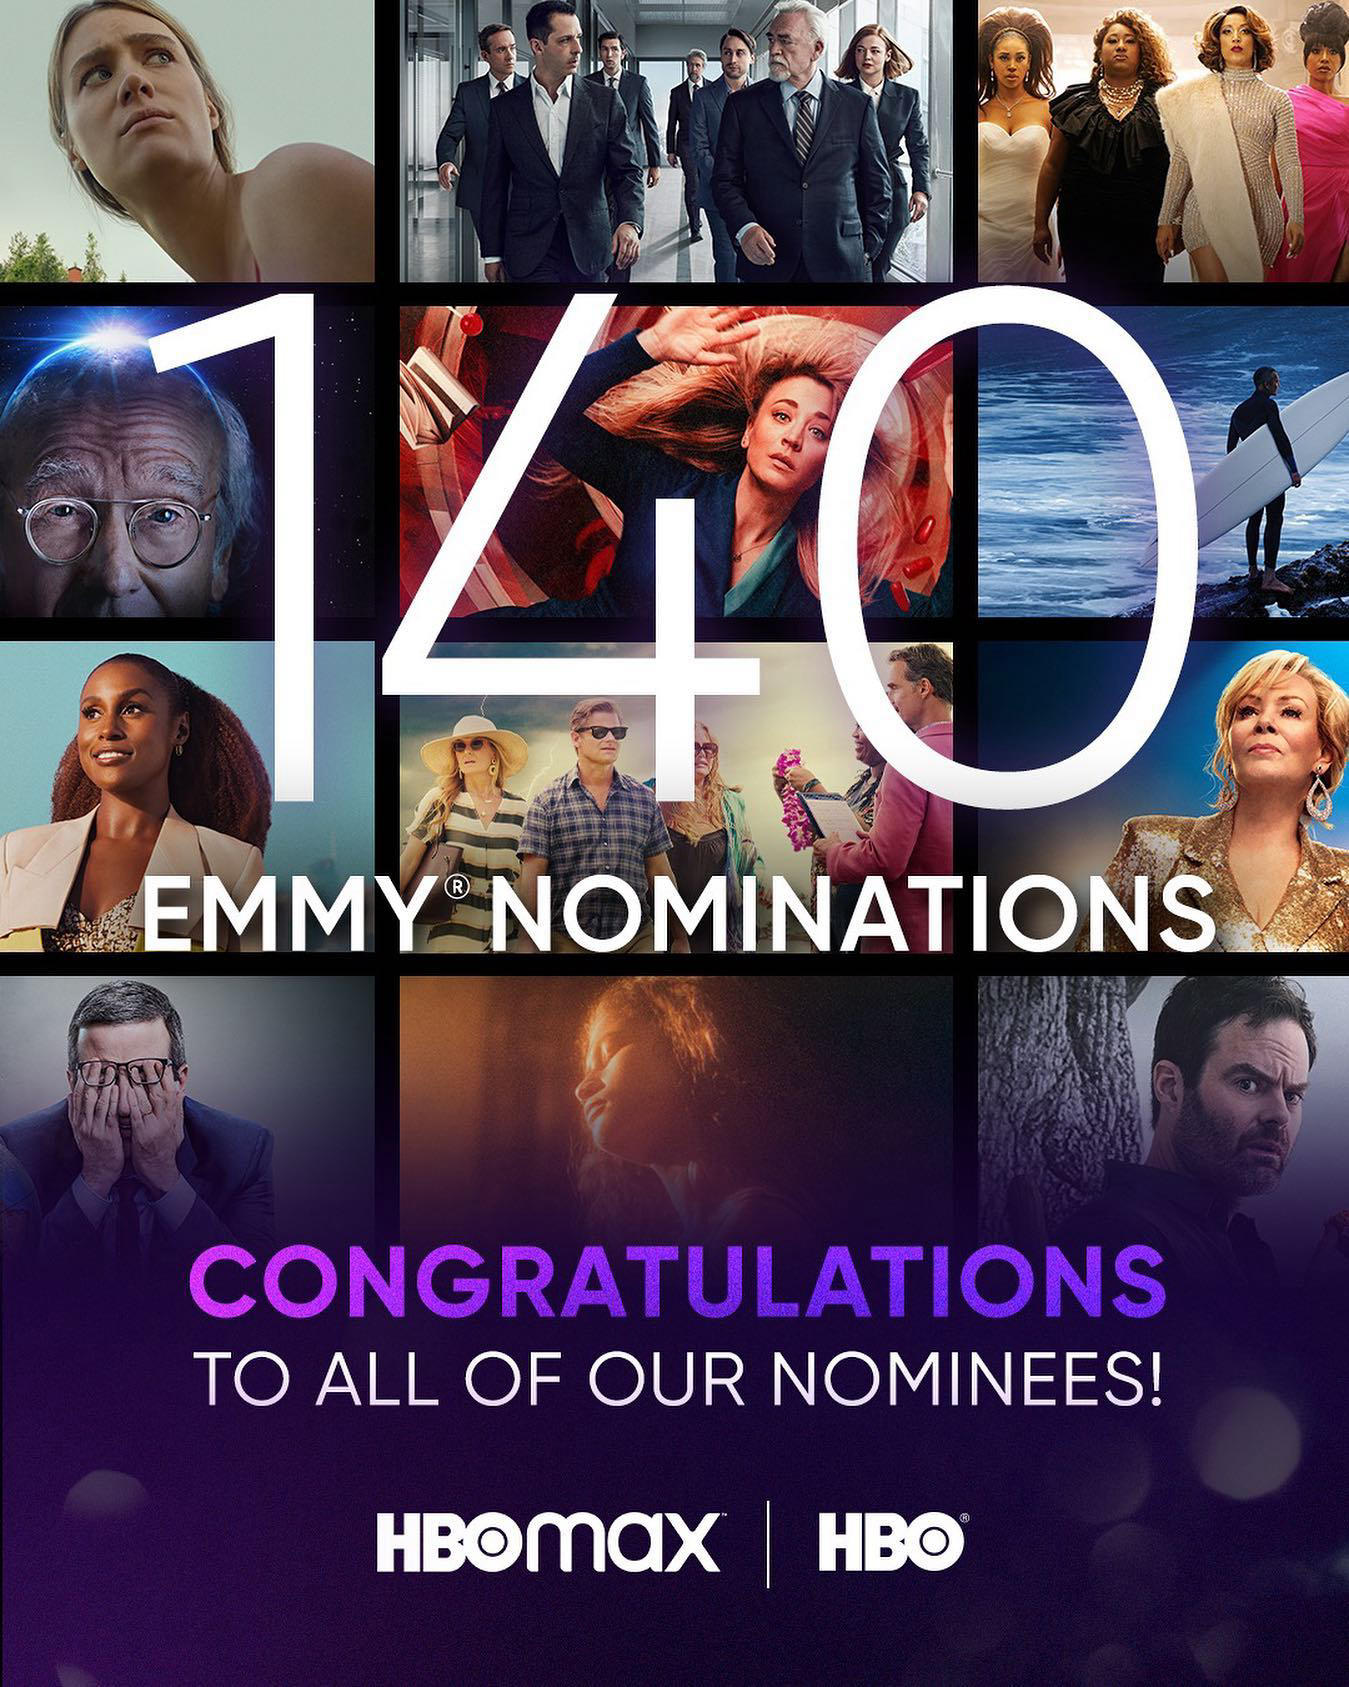 HBO Max - Congratulations to all our incredible #Emmys2022 nominees